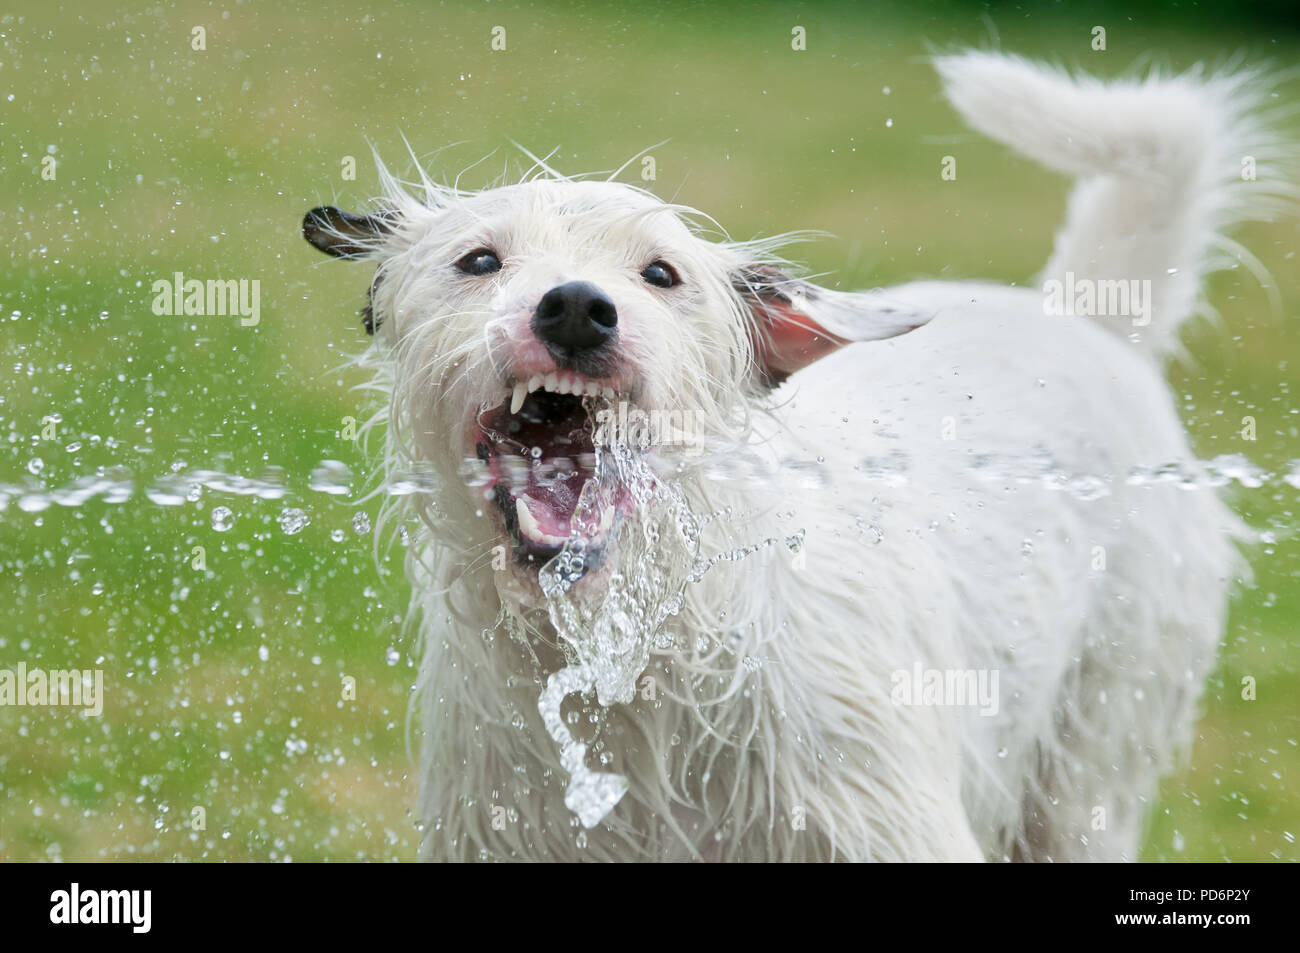 Jack Russell Terrier dog catches with its open mouth a water jet from a garden hose and drinks the fresh water on a hot summer day Stock Photo